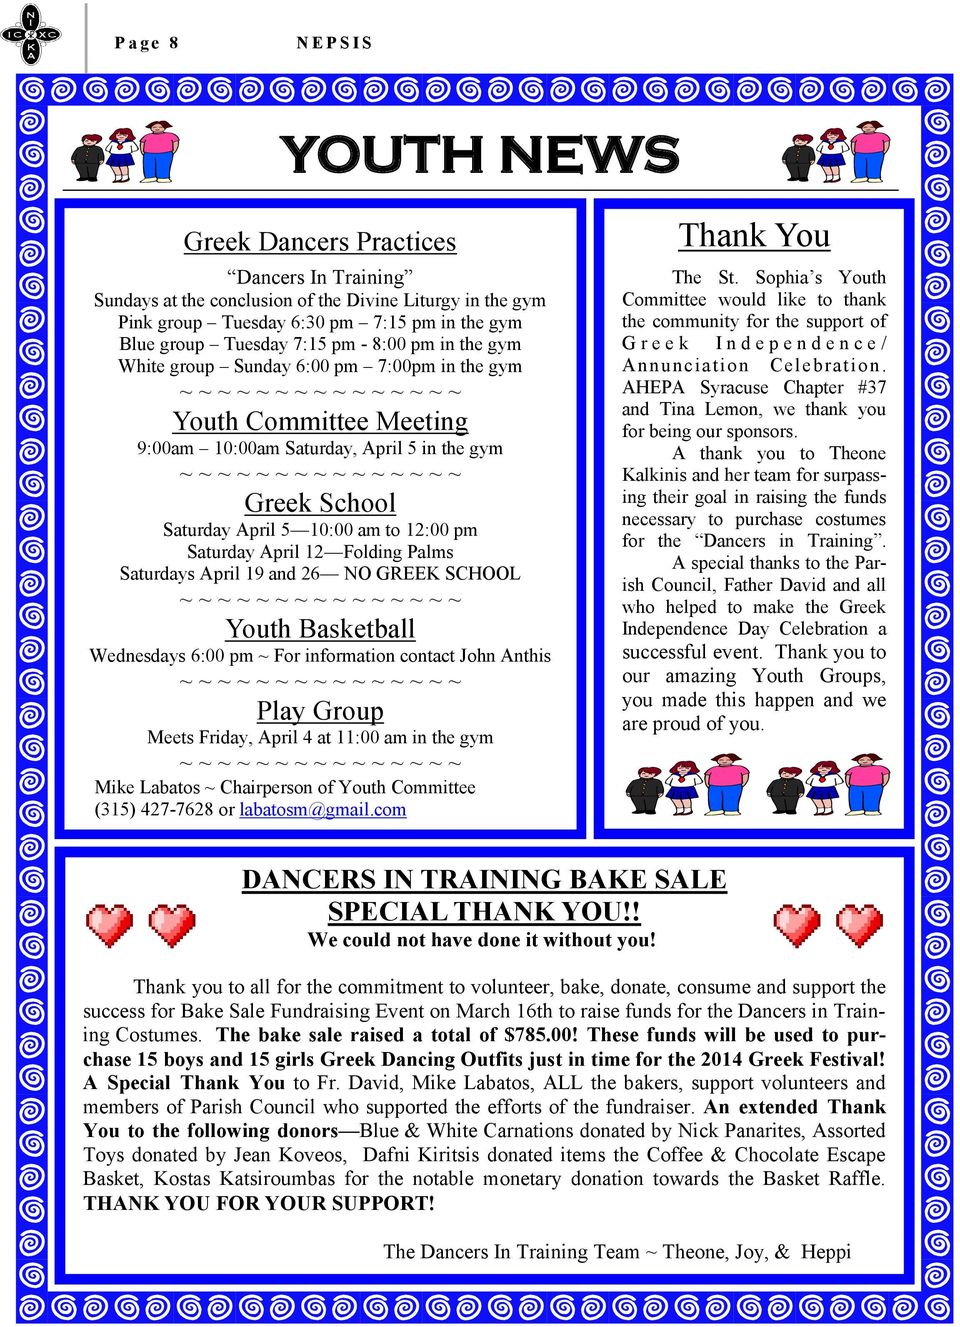 School Saturday April 5 10:00 am to 12:00 pm Saturday April 12 Folding Palms Saturdays April 19 and 26 NO GREEK SCHOOL ~ ~ ~ ~ ~ ~ ~ ~ ~ ~ ~ ~ ~ ~ ~ Youth Basketball Wednesdays 6:00 pm ~ For